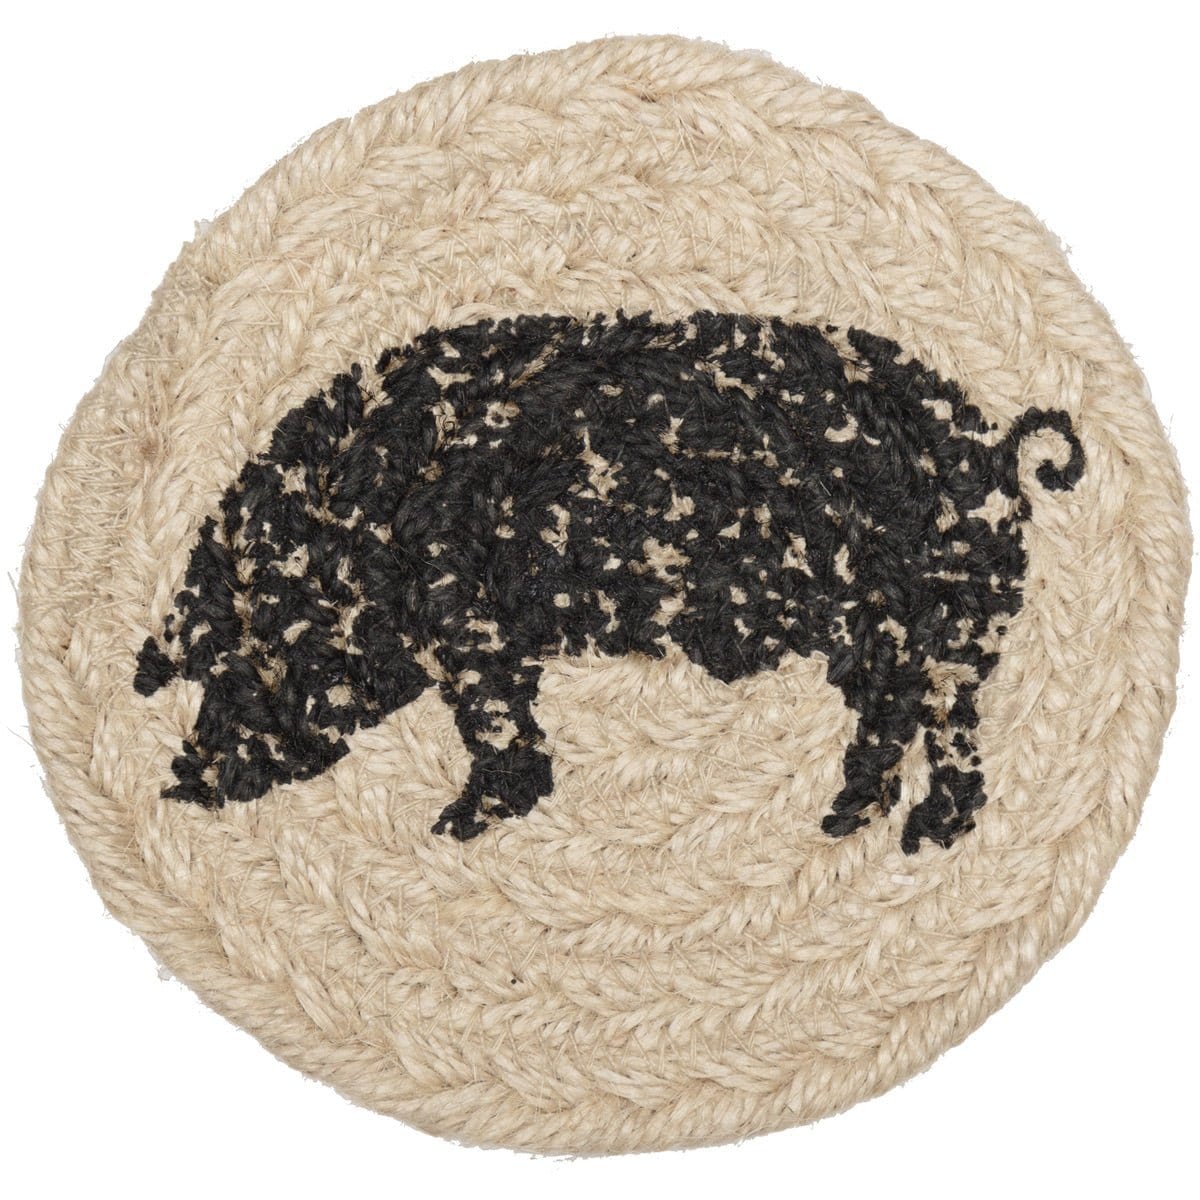 Sawyer Mill Charcoal Pig Braided & Stenciled Coaster Round Set of 6-Craft Wholesalers-The Village Merchant